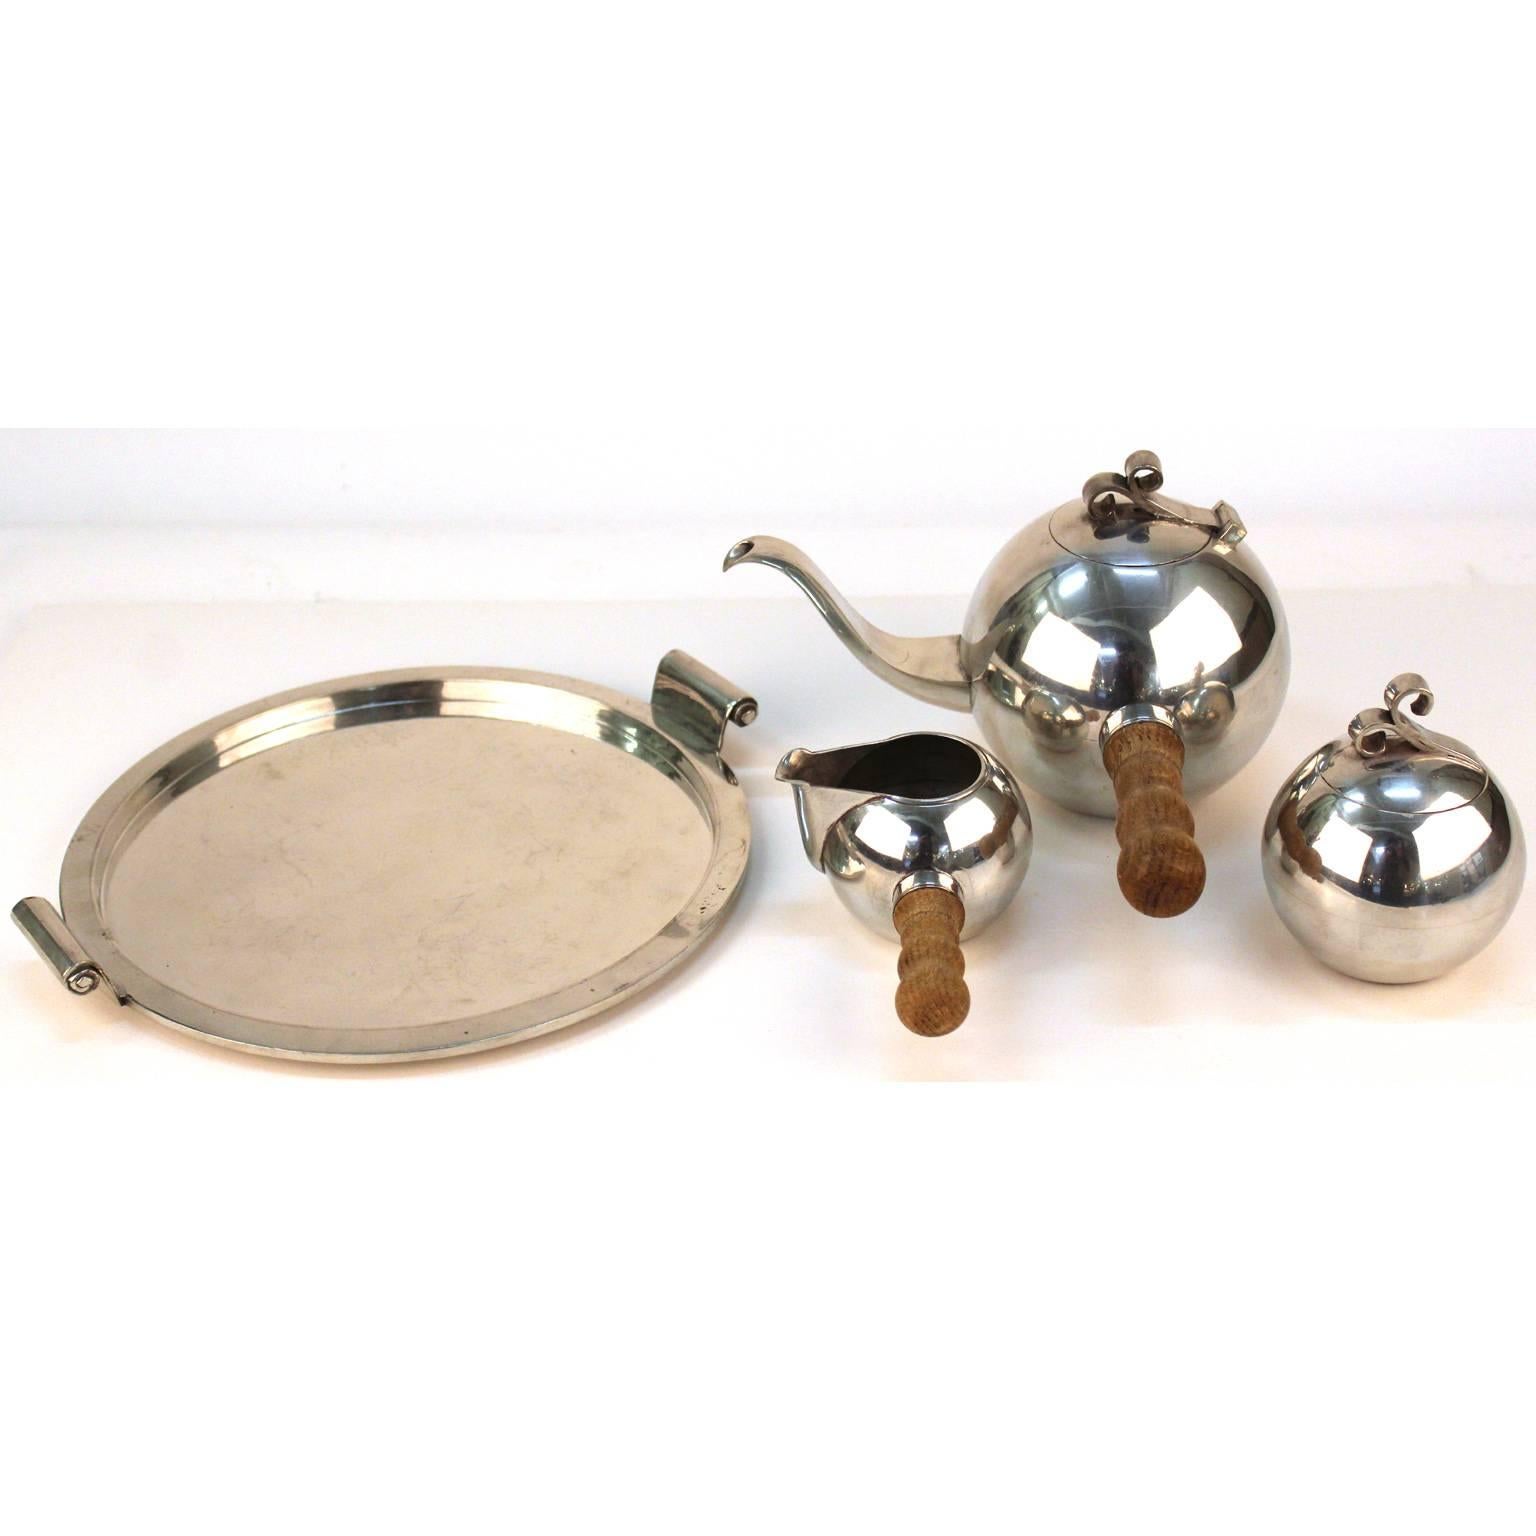 Havstad Norwegian Art Deco Pewter Tea Set on Serving Plate In Good Condition For Sale In New York, NY